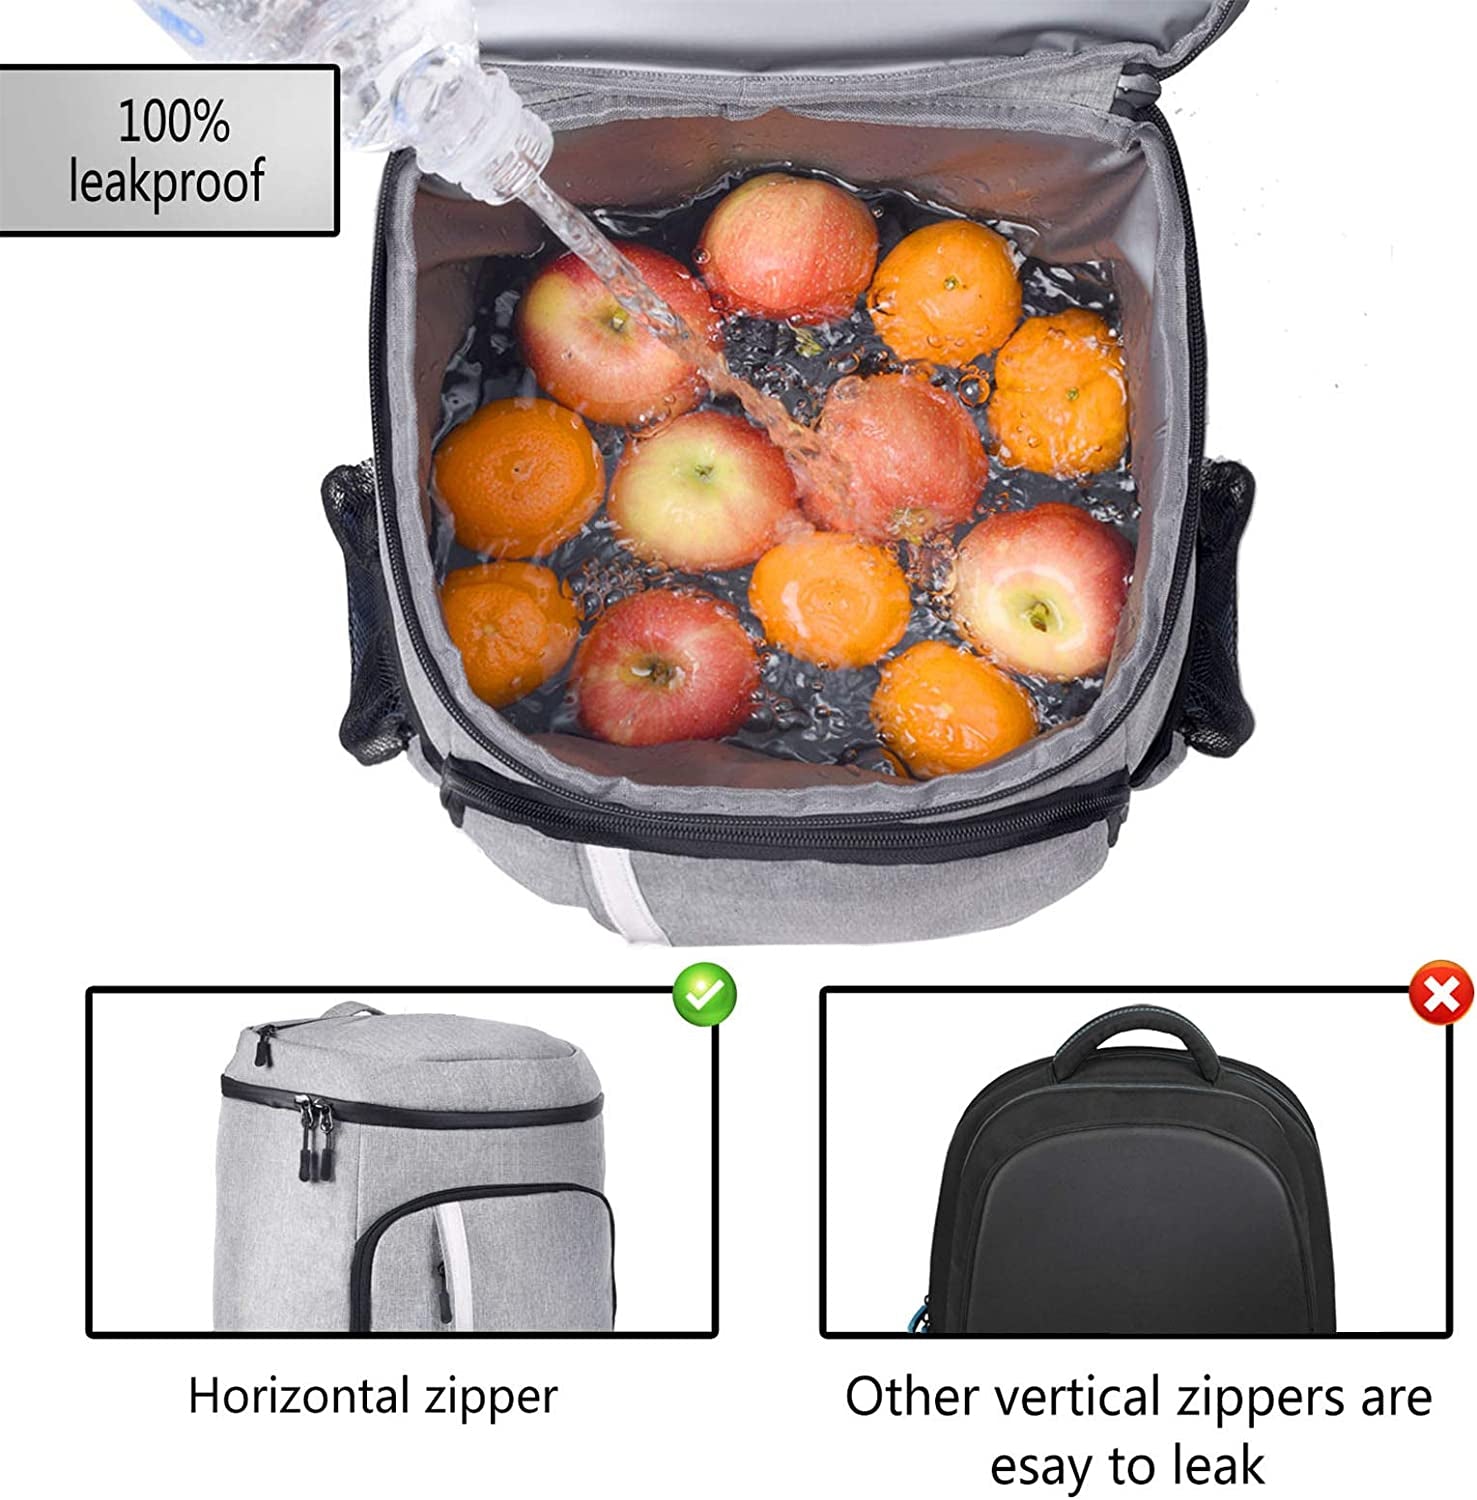 Insulated Leakproof Backpack Cooler Bag for Men and Women - 30 Can Capacity